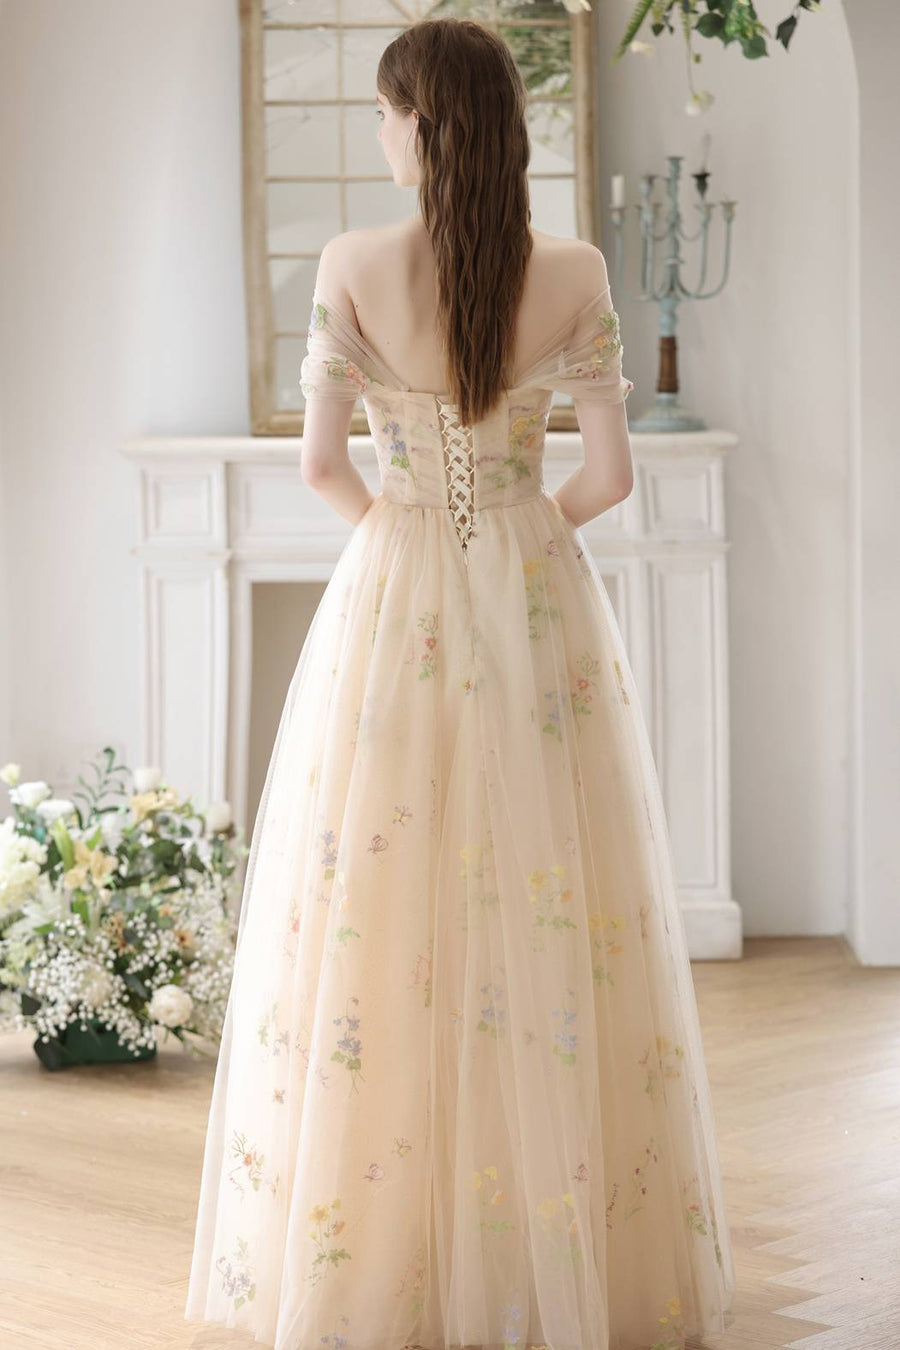 Sweetheart Champagne Floral Corset Long Prom Dress